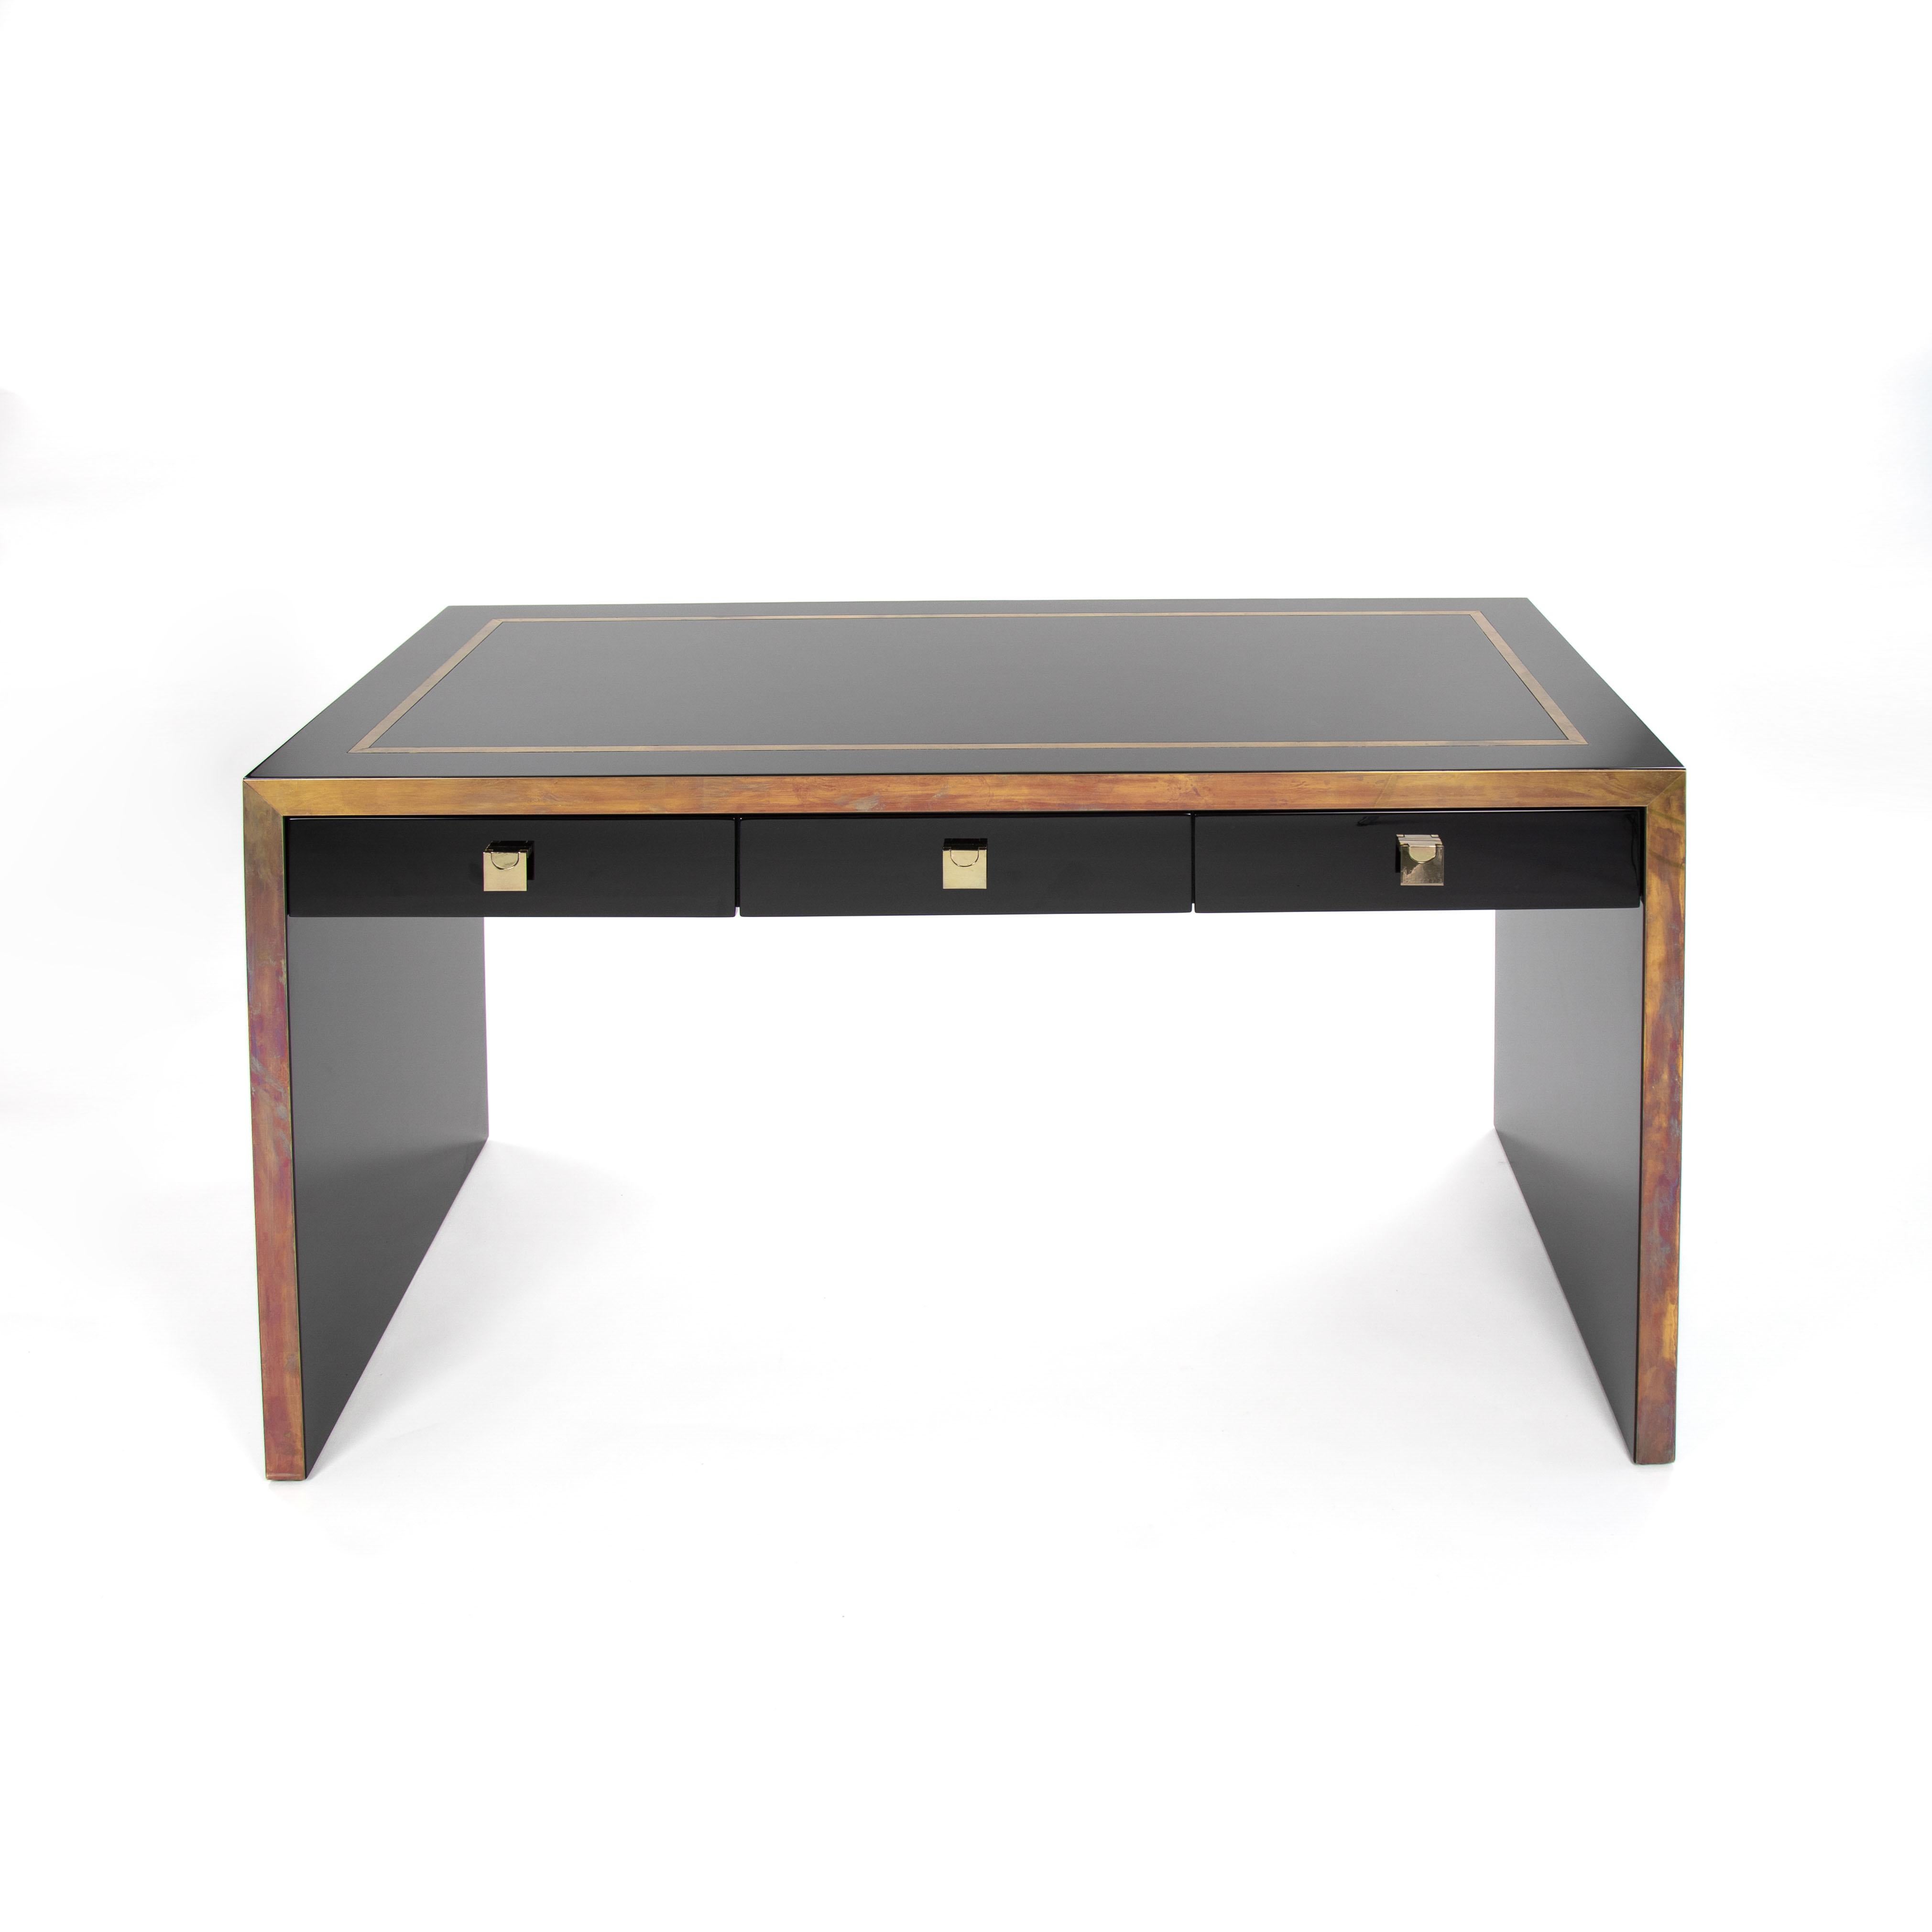 Straight-lined desk in a clear design by French designer Jean Claude Mahey.

The object is made entirely of beech wood and is very heavy.
The desk has 3 drawers with folding brass handles.
The top plate has an all-round brass inlay decoration that